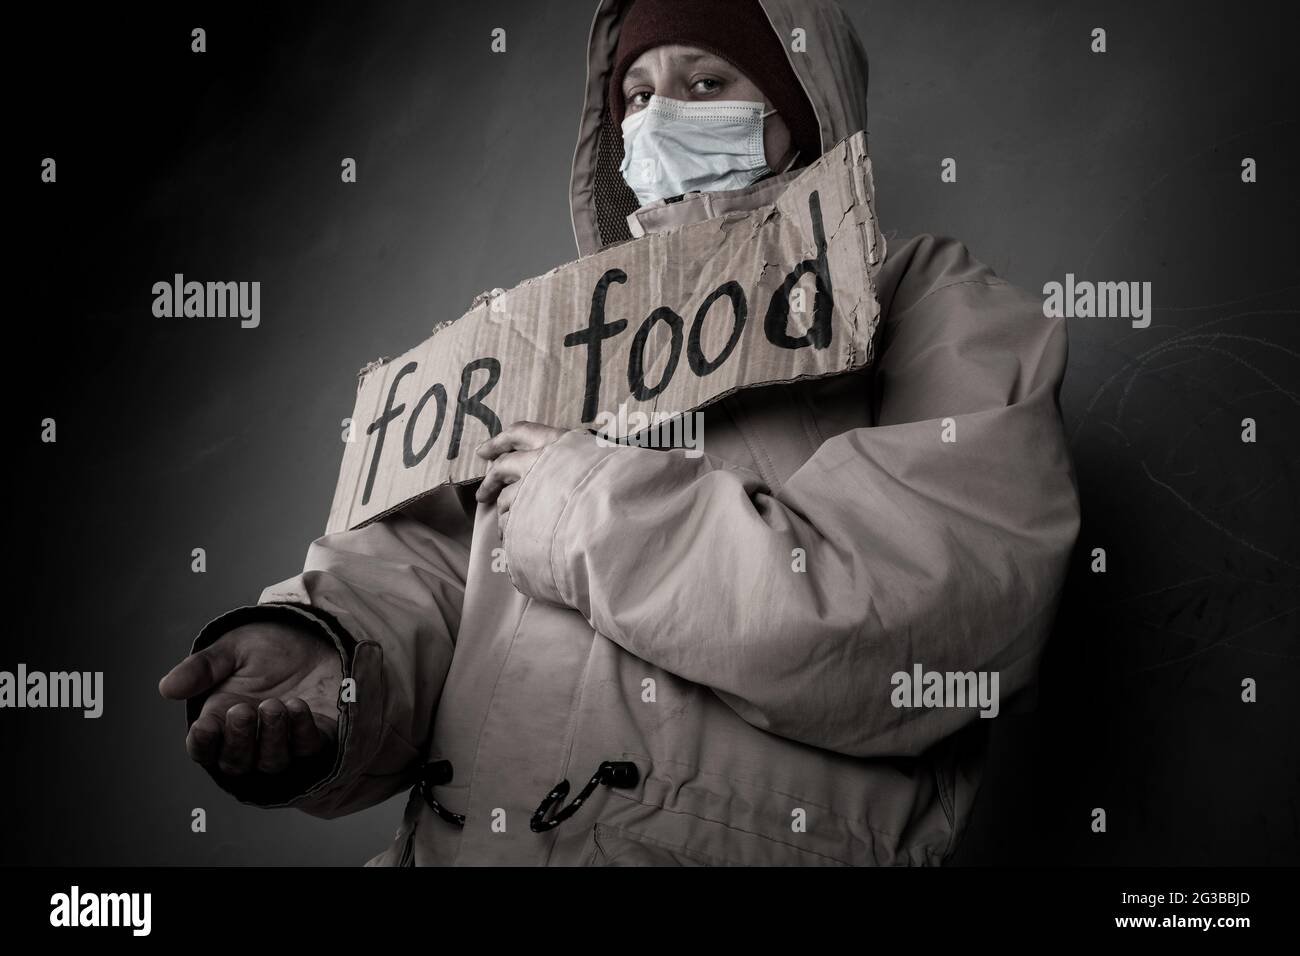 homeless poor beggar asks for help and food ,unemployed in despair. Stock Photo